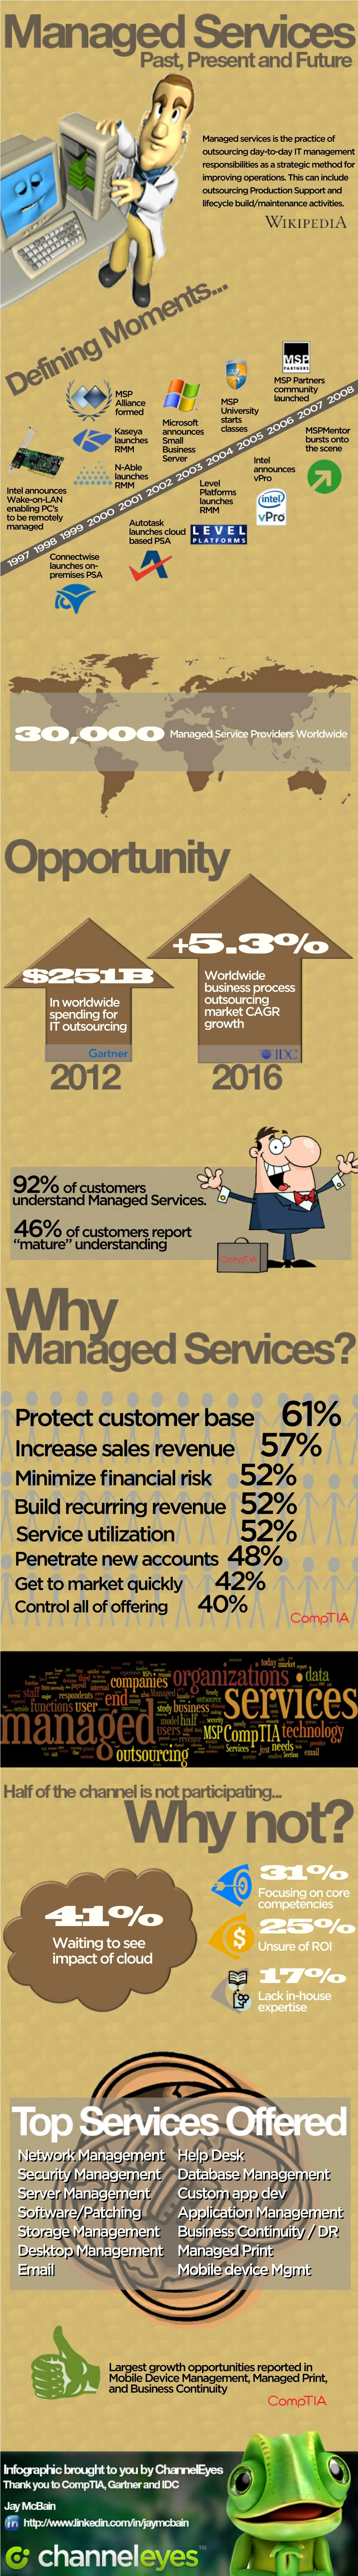 managed services is the practice of